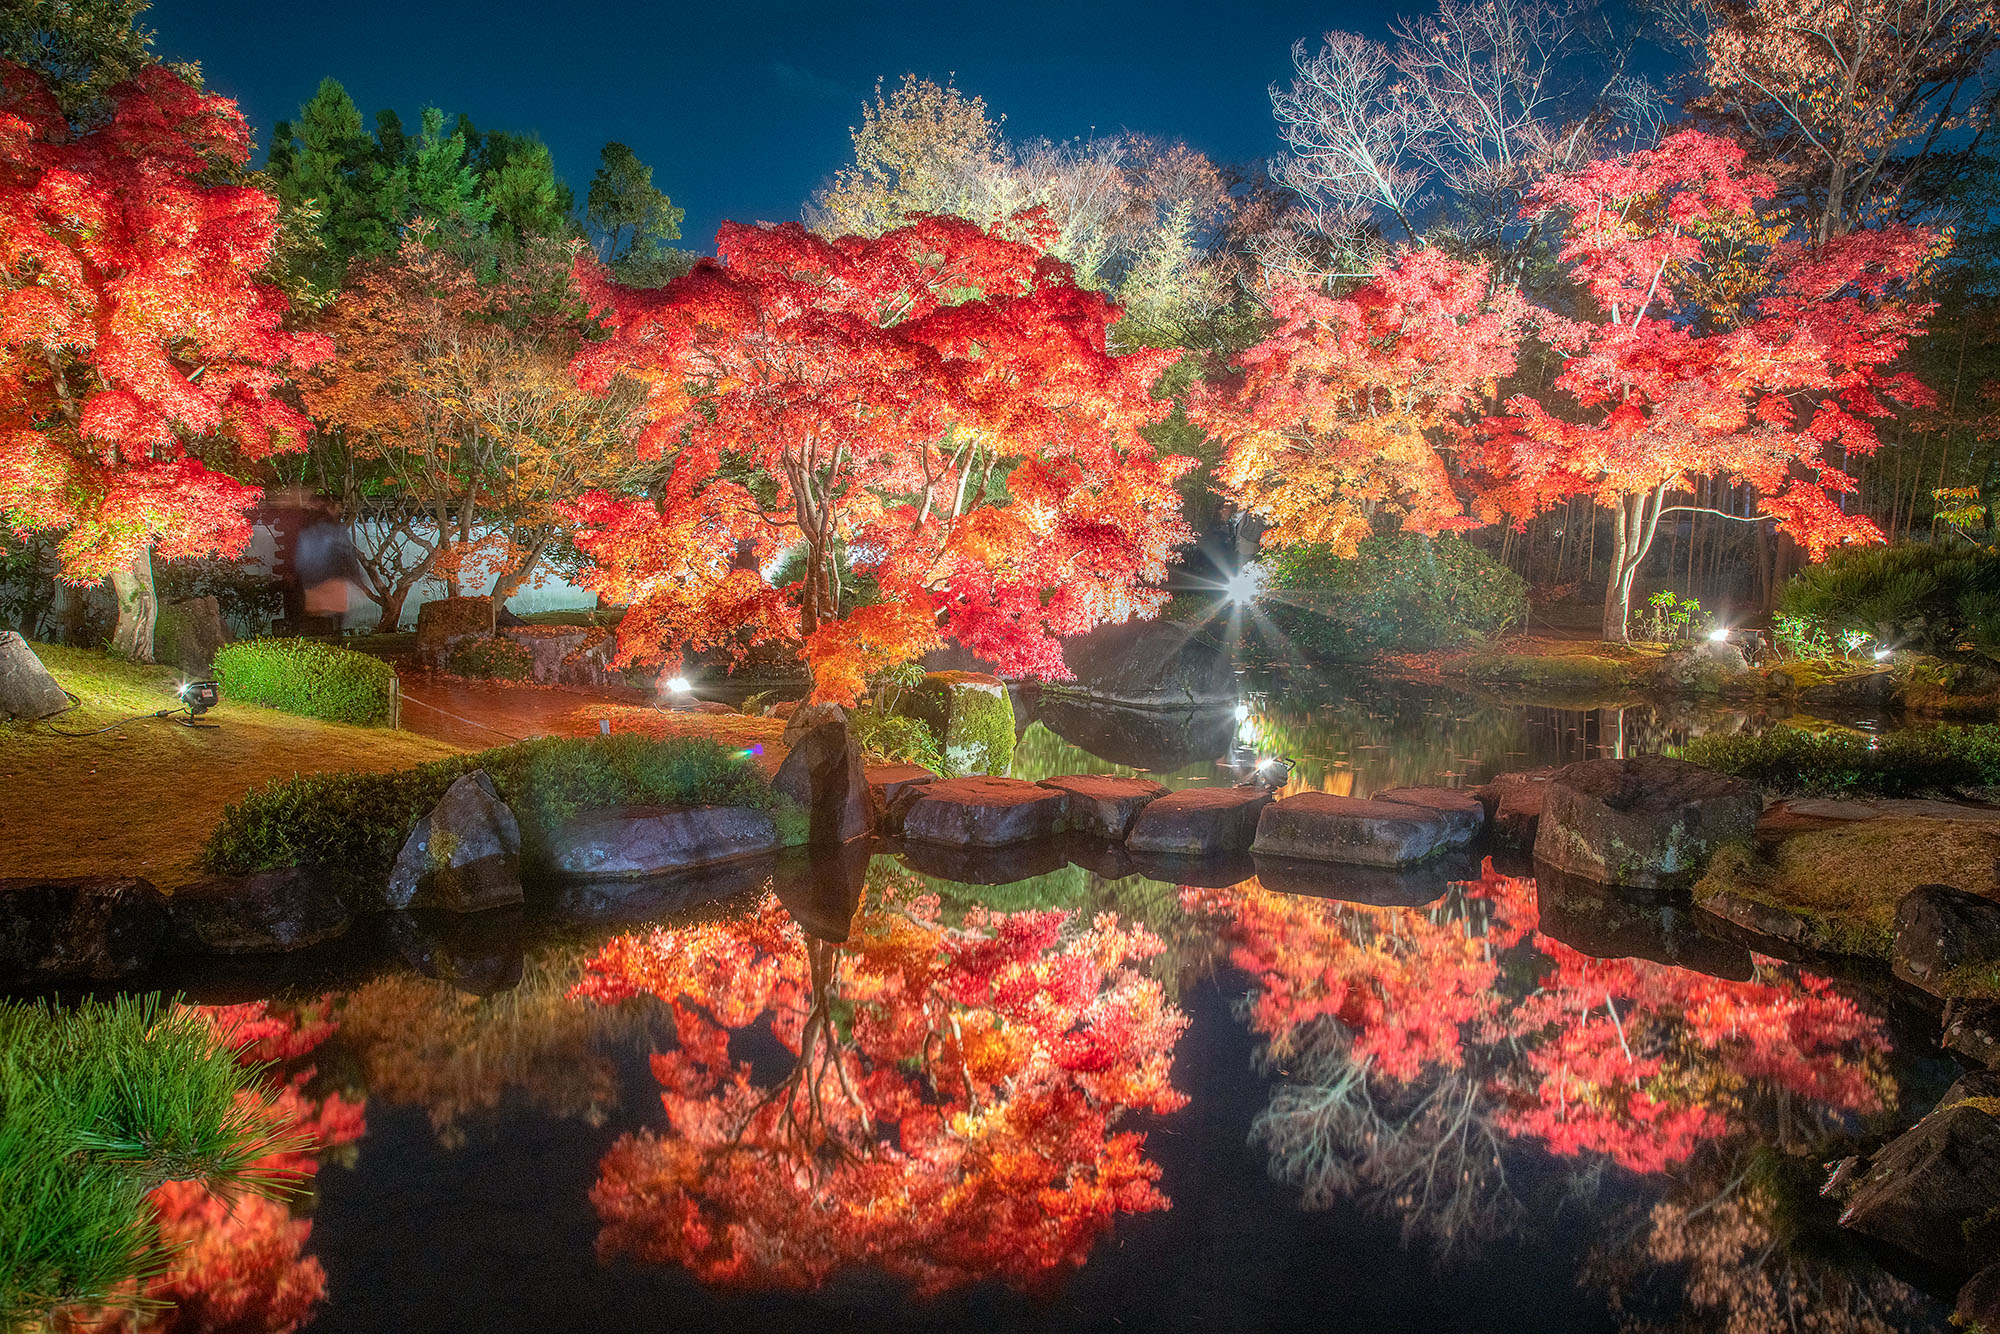 At the enchanting Koko-en Gardens in Himeji, Japan, I captured a fleeting moment of autumn magic. The gardens, usually reserved...